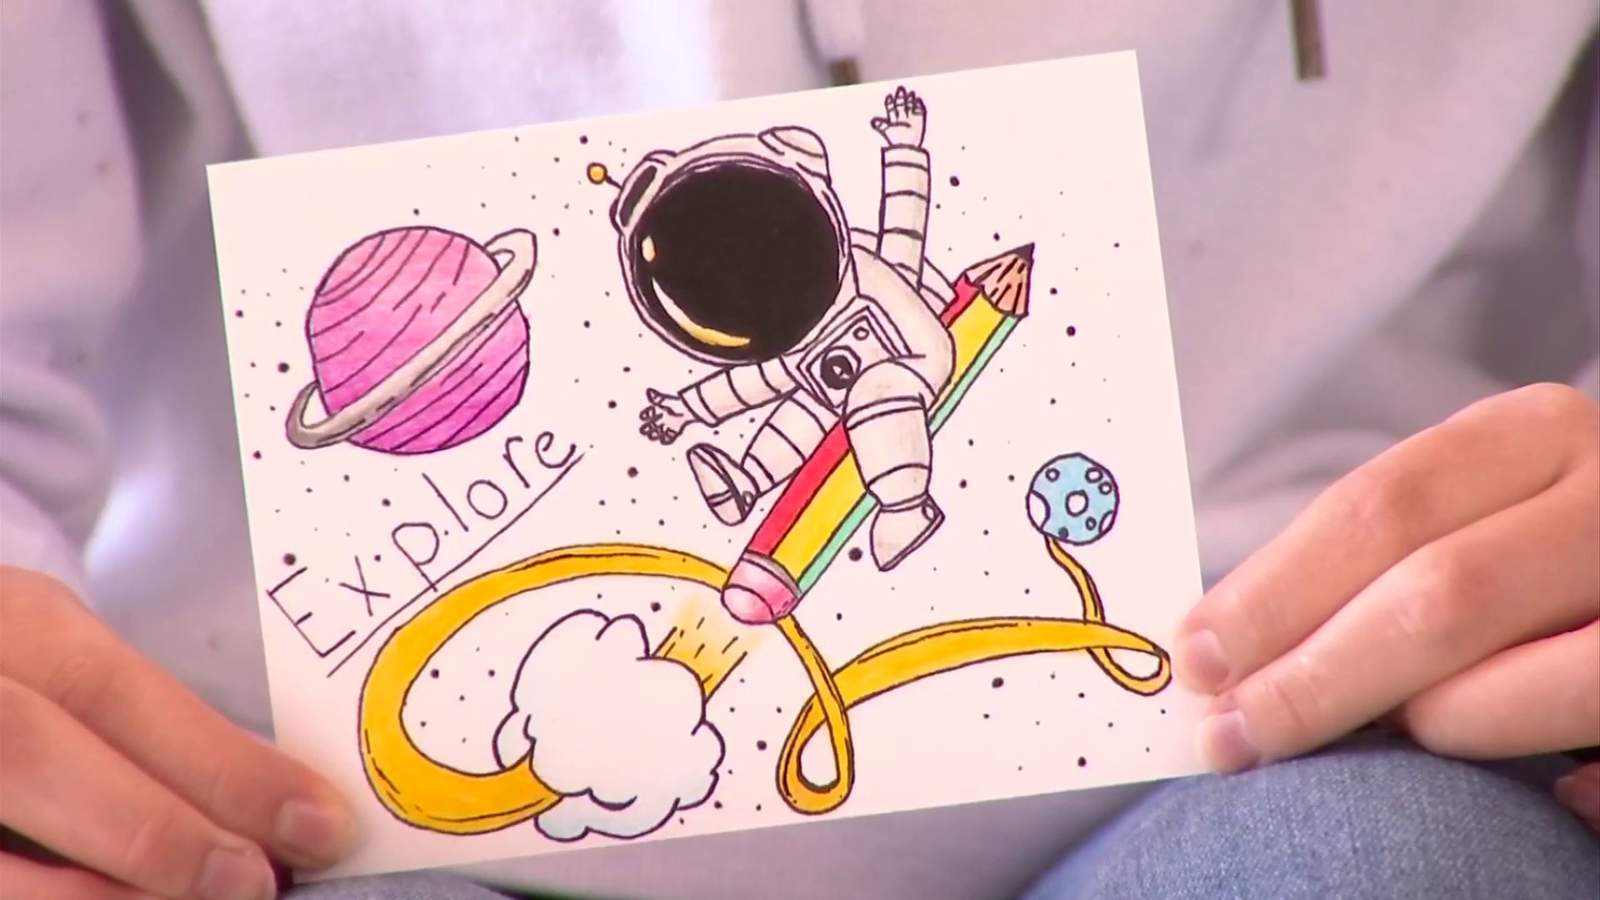 'Out of this world’: Homestead launches kids program to send postcards to space